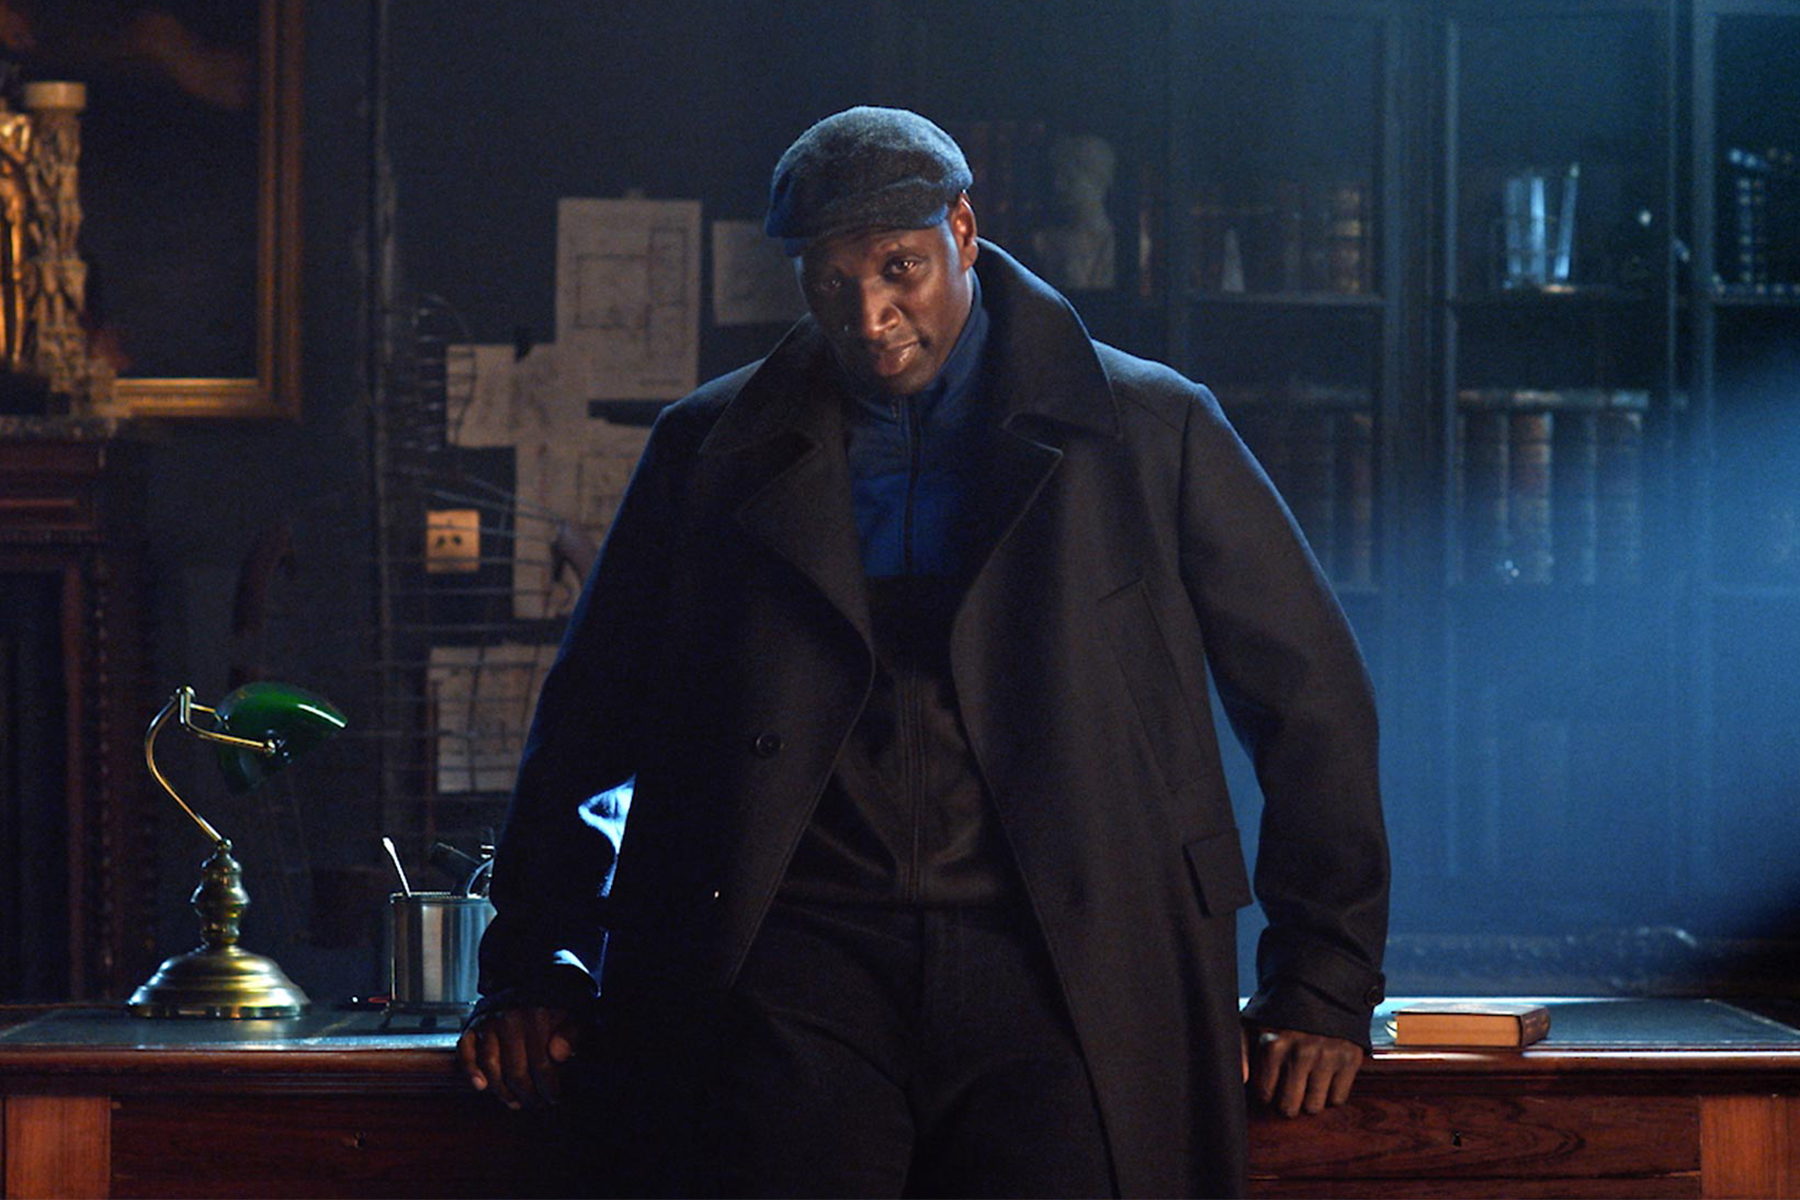 Assane Diop, as played by Omar Sy, in the Netflix programme, Lupin.